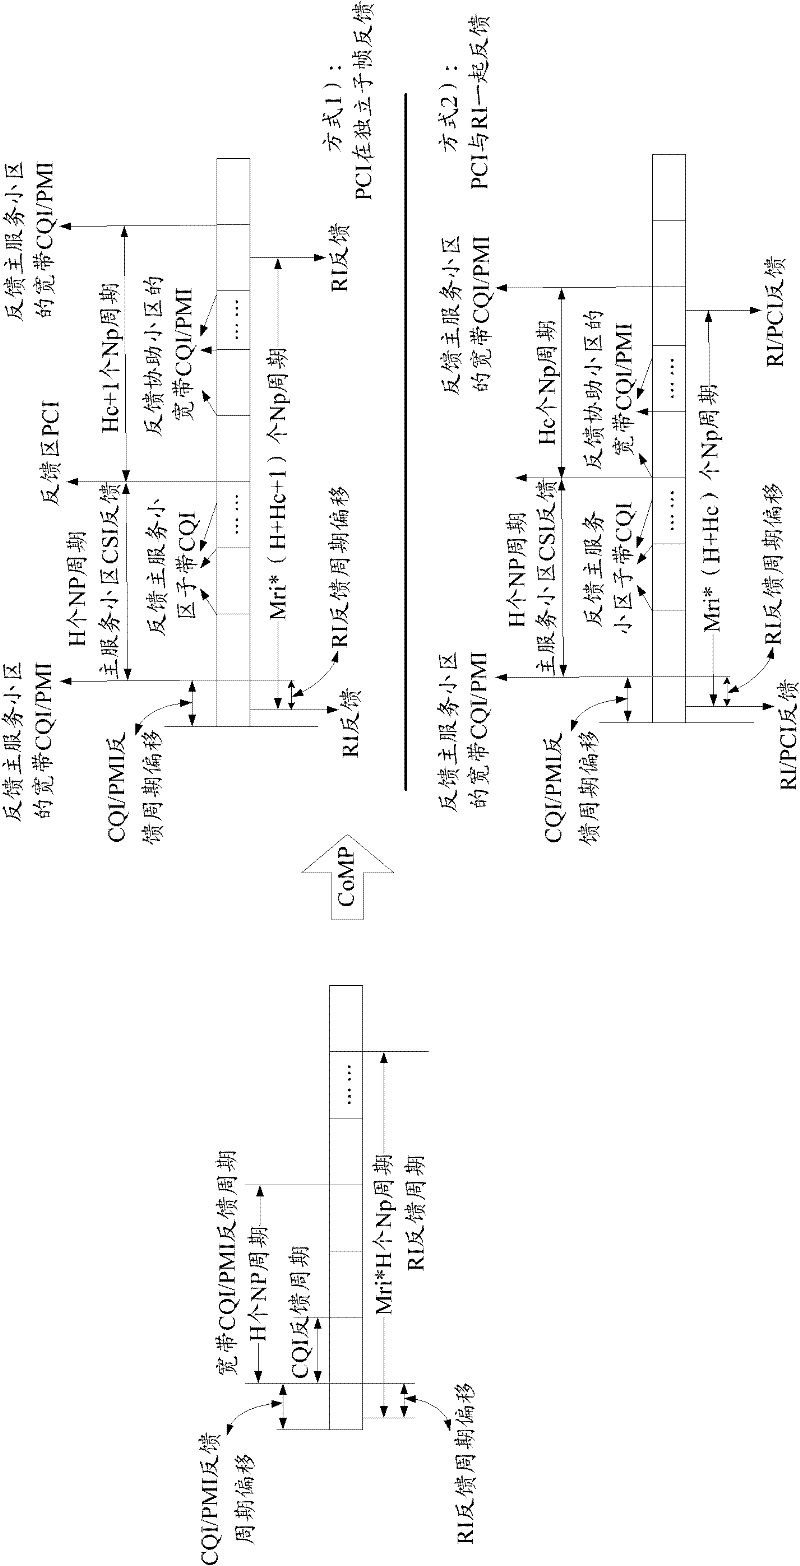 Method and system for channel state information feedback under CoMP (cooperative multi-point) mode